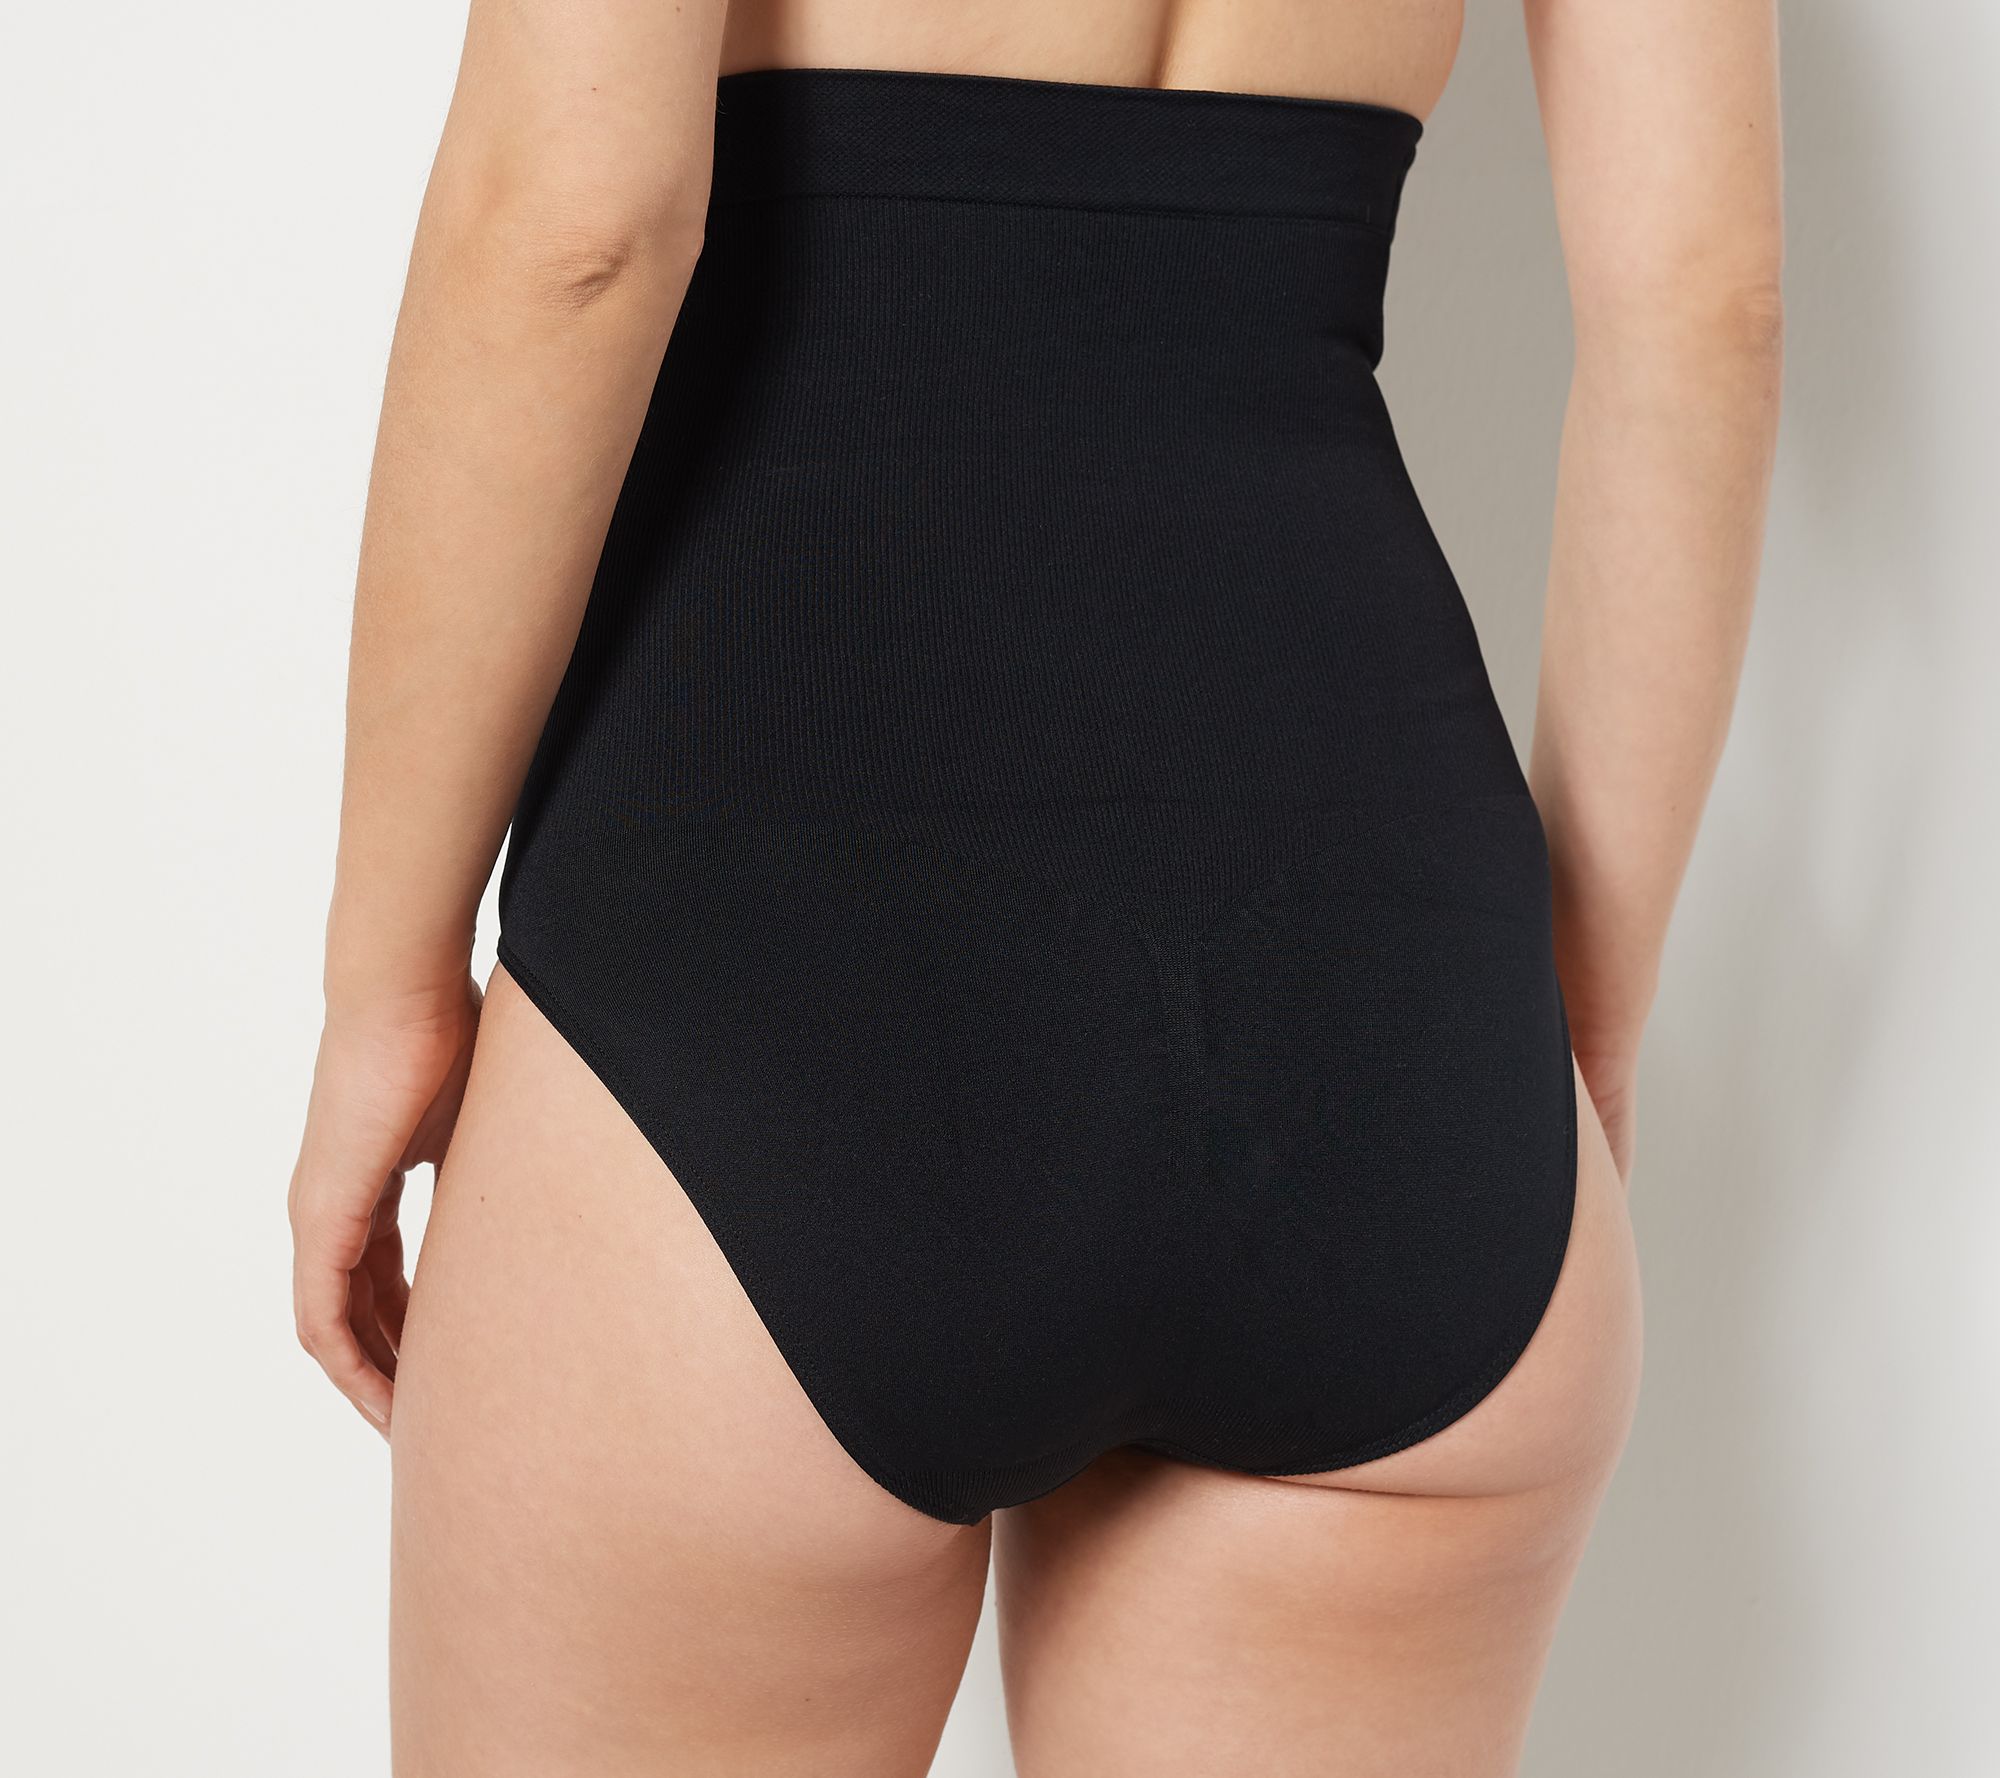 What Waist: The wait is over! Tummy Control Shapewear Thong is BACK! 🔥